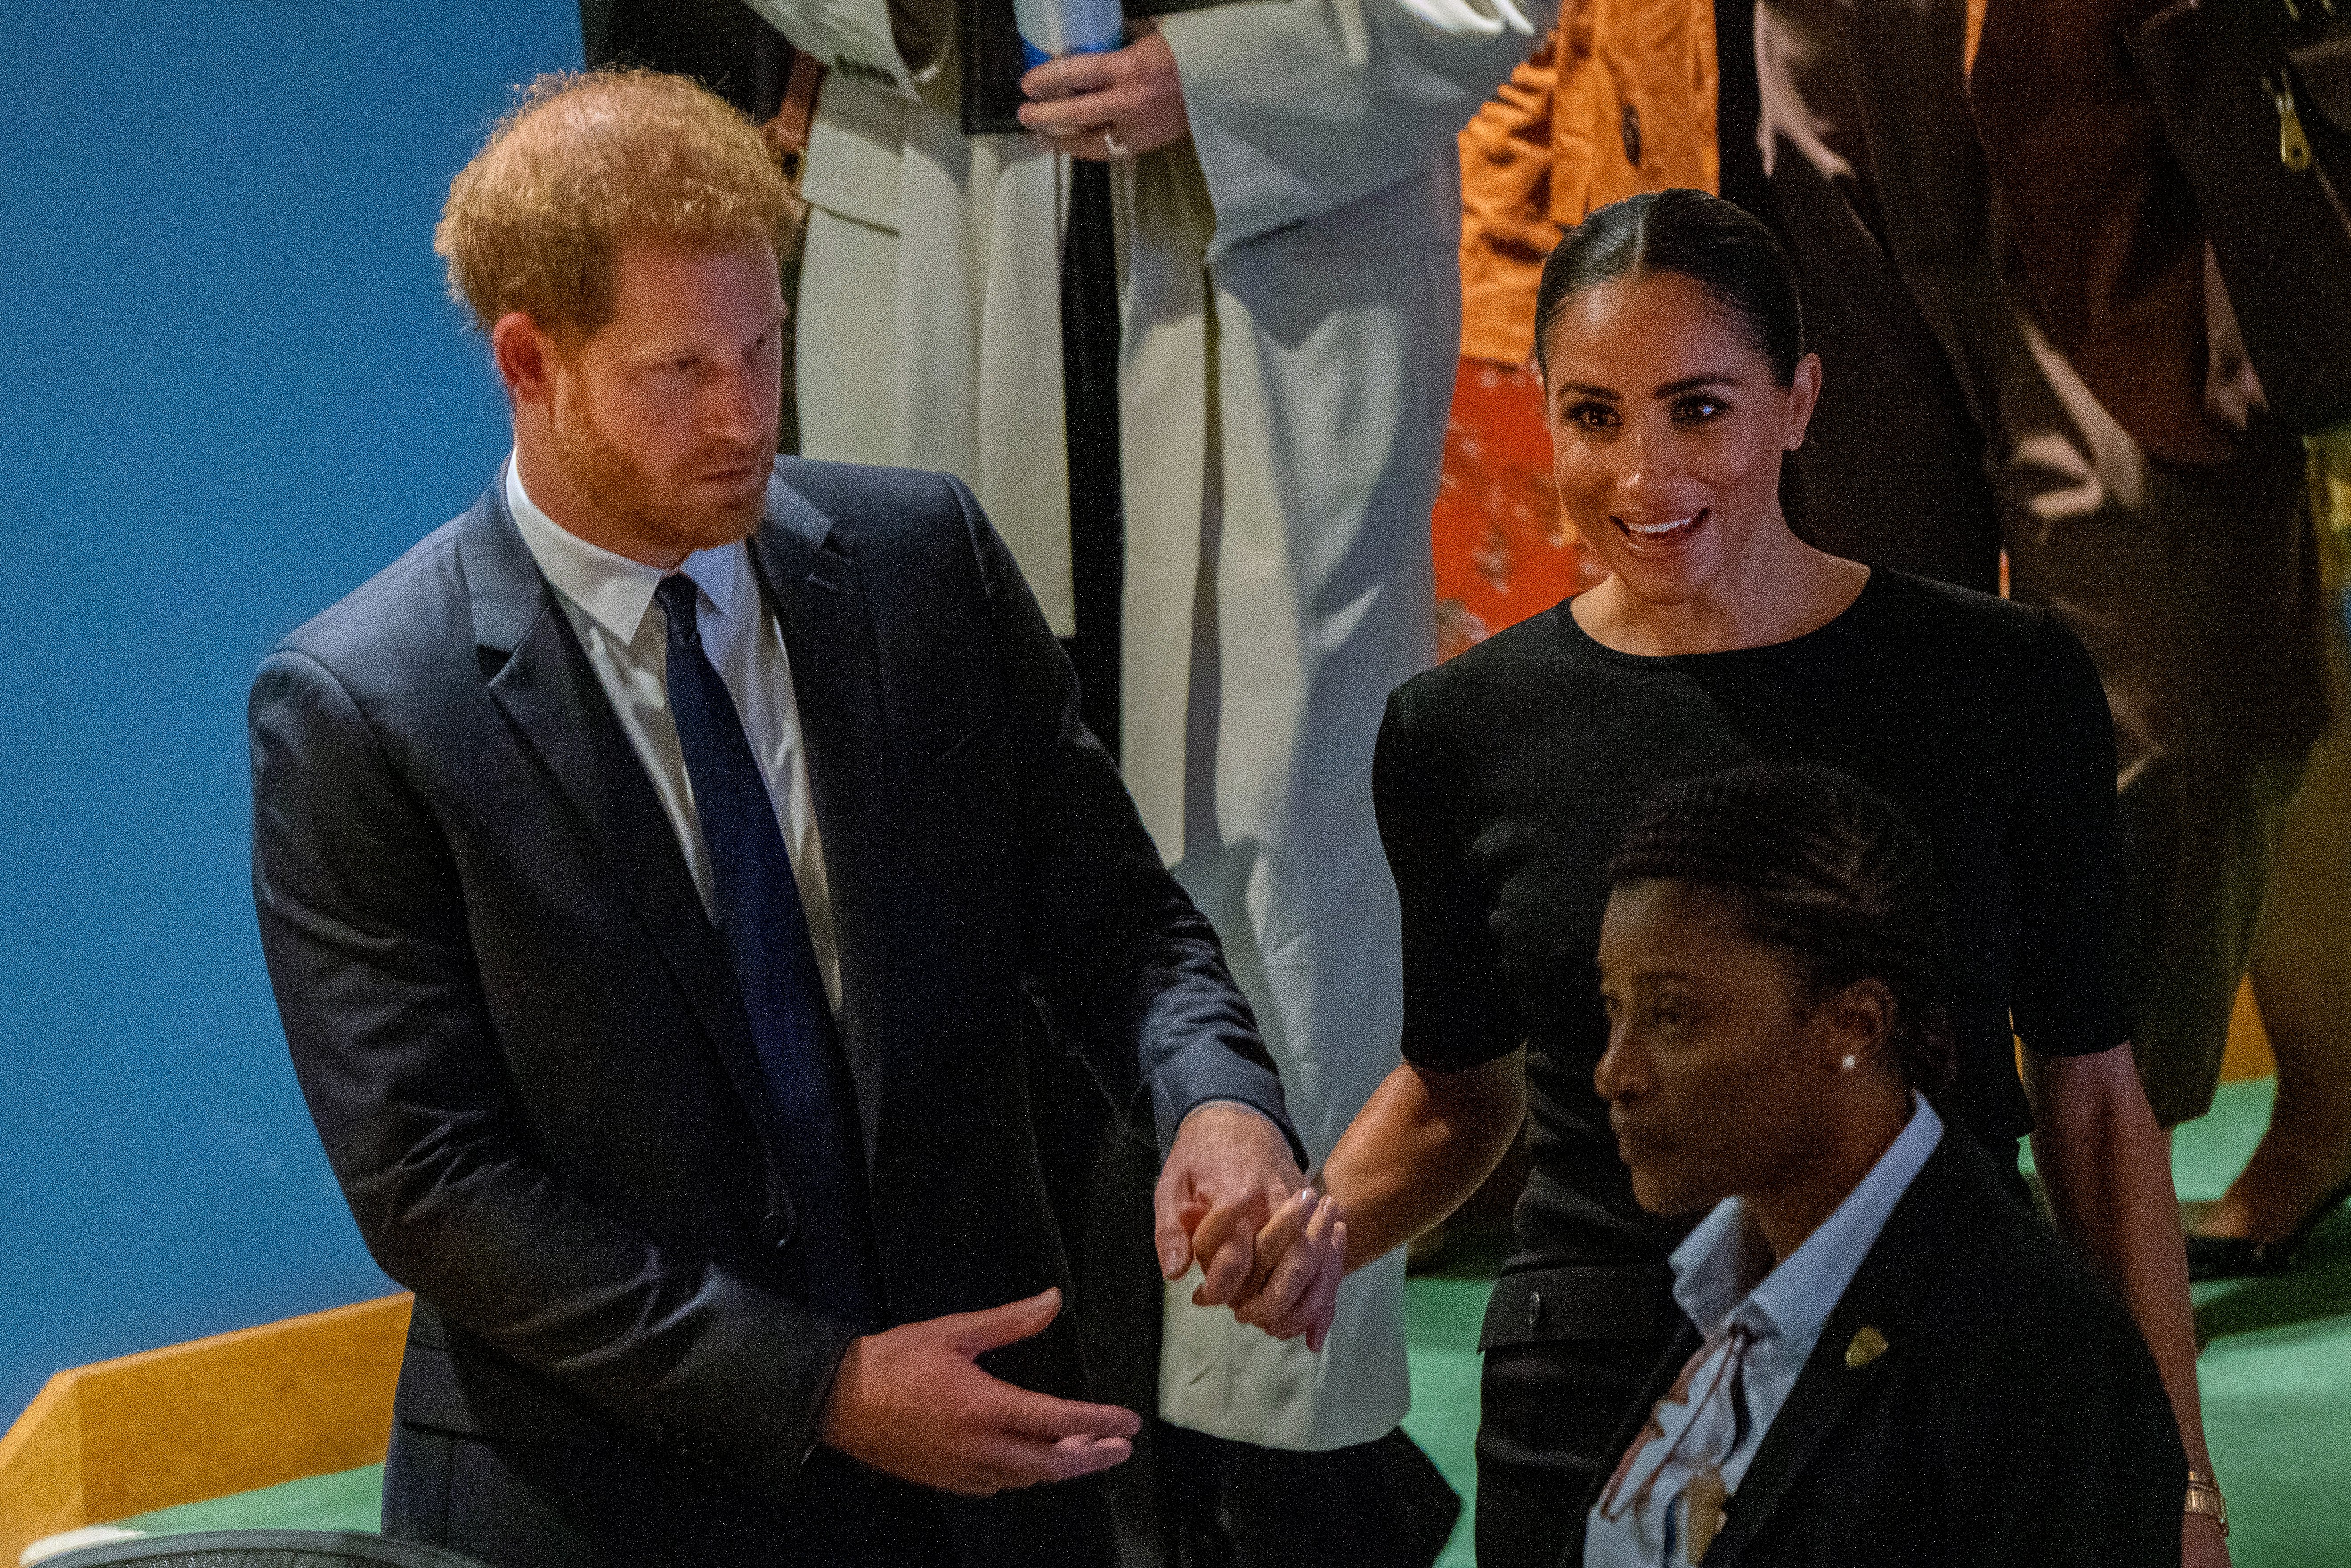 Prince Harry, Duke of Sussex and Meghan, Duchess of Sussex arrive at the United Nations General Assembly on Nelson Mandela International Day at U.N. headquarters on July 18, 2022 . New York City. | Source: Getty Images 